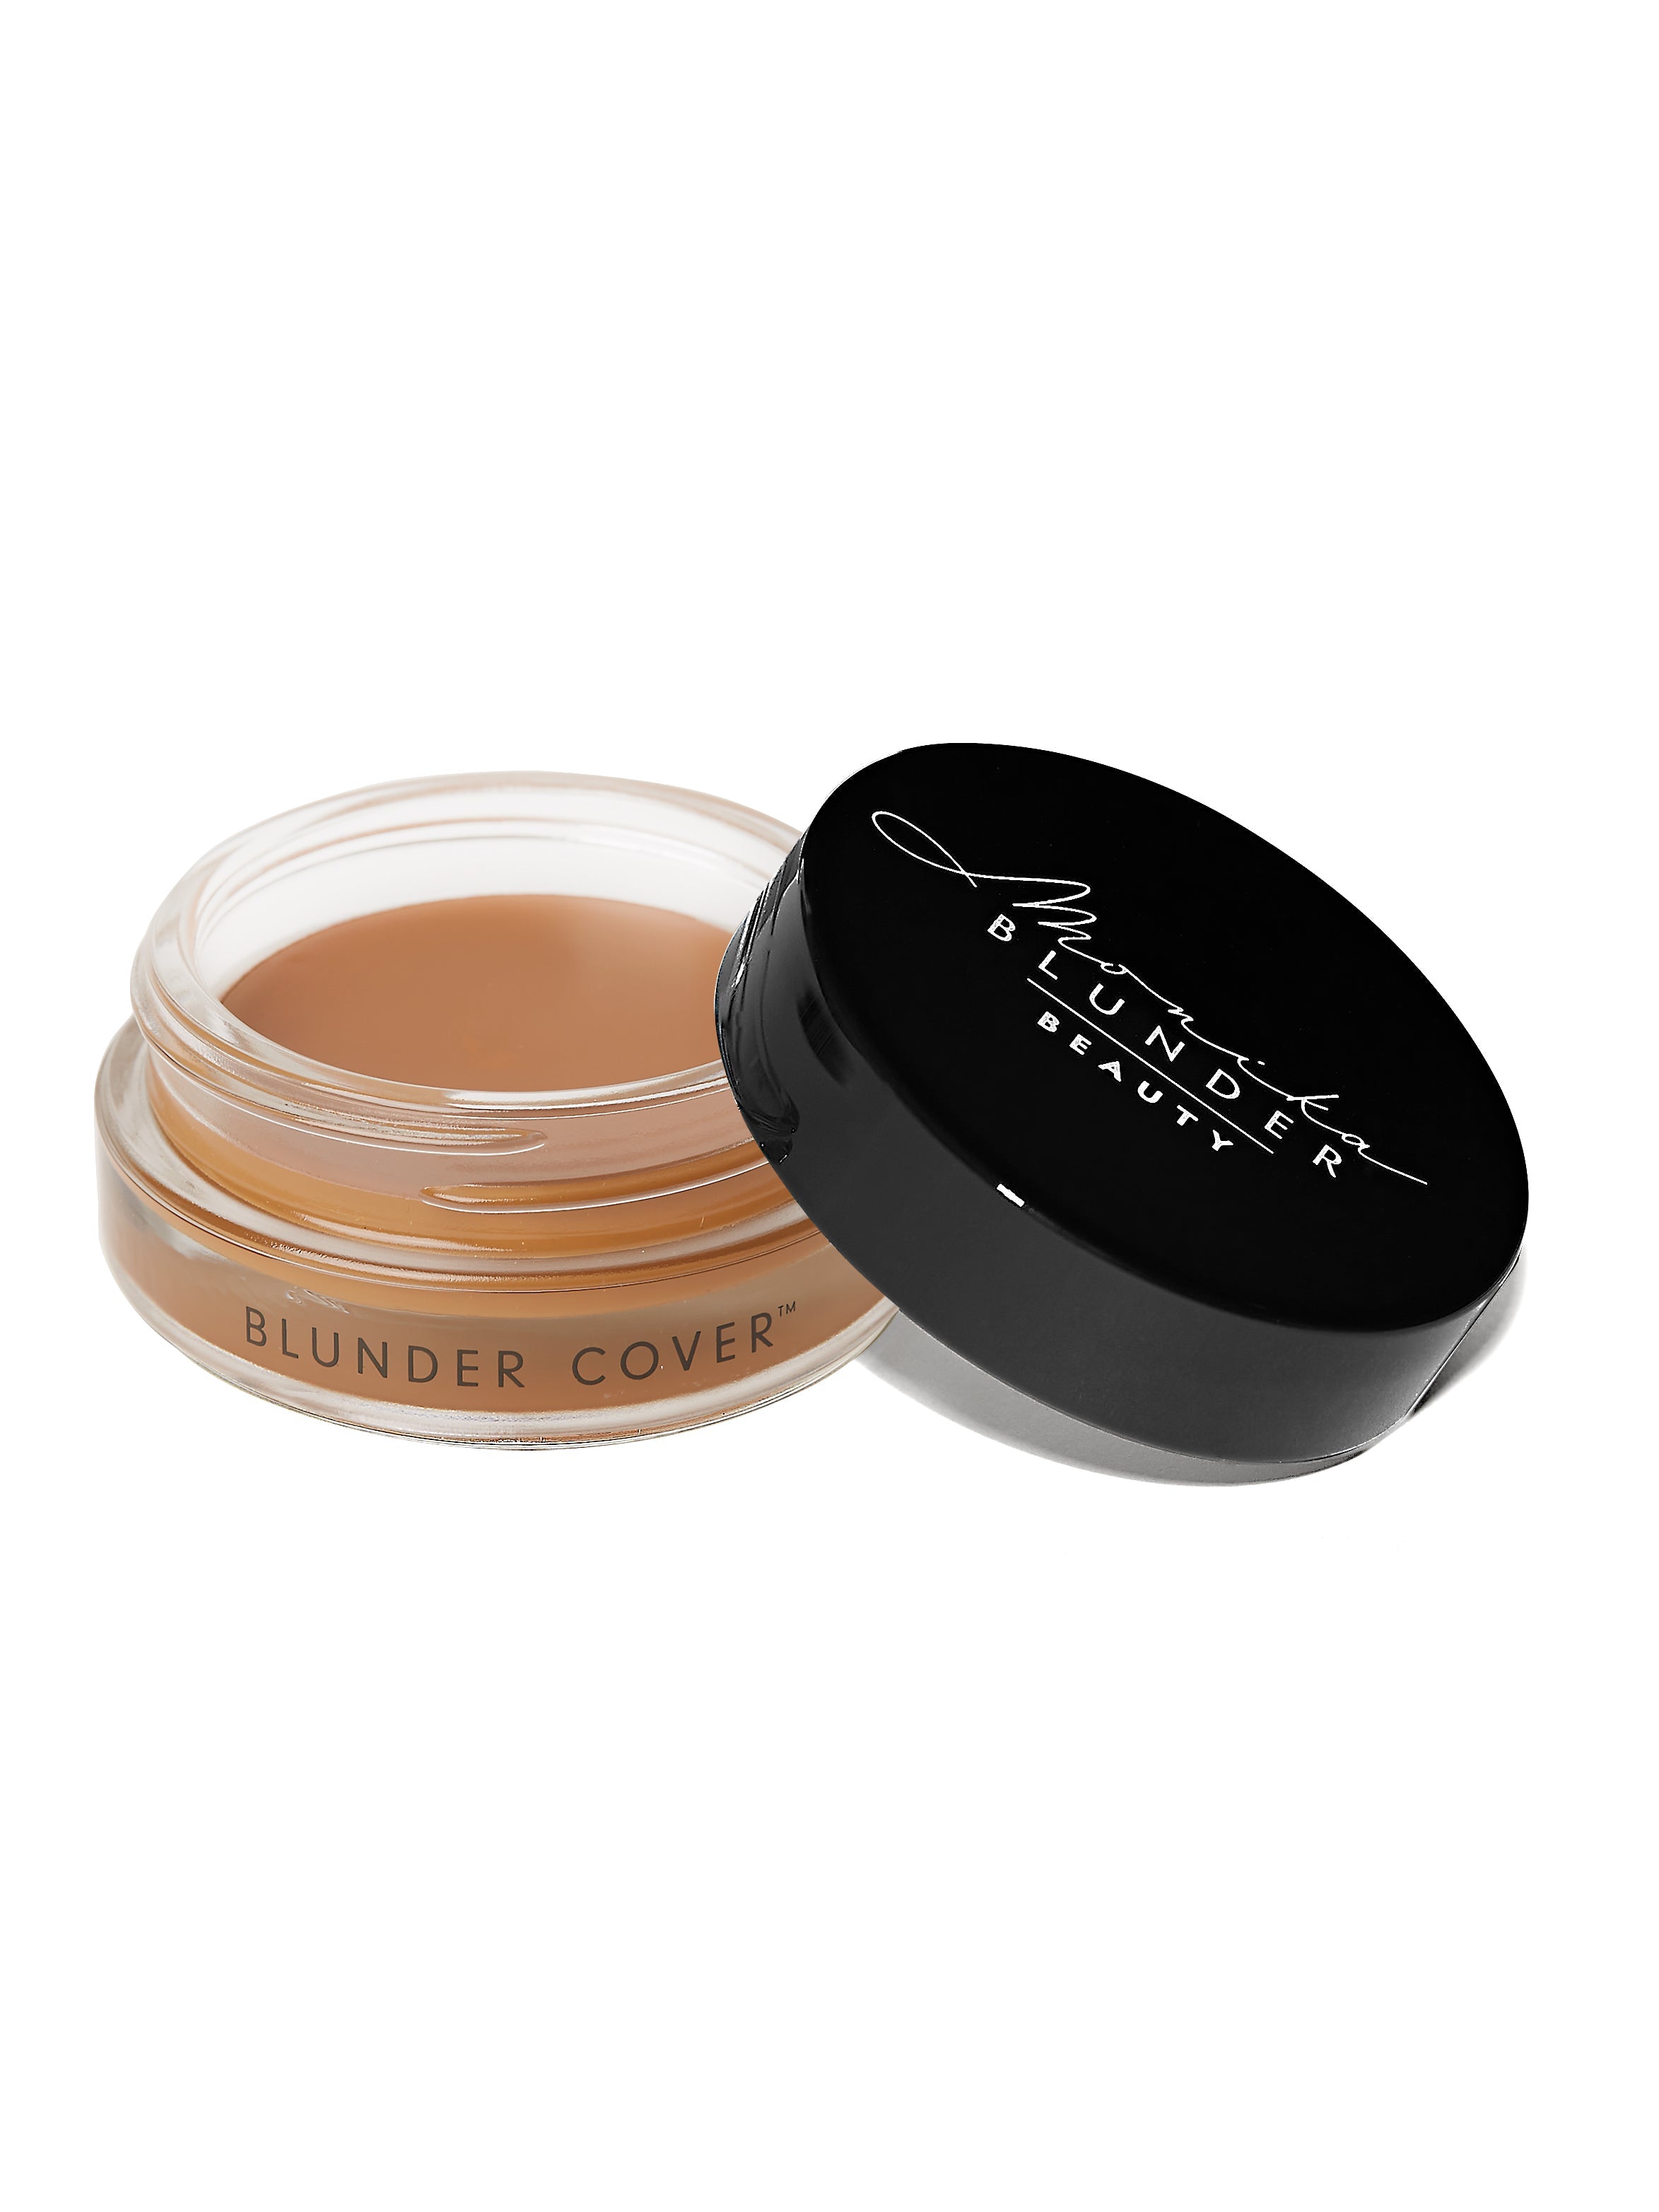 Blunder Cover an All-In-One Foundation/Concealer Shade: 6.25 - 0